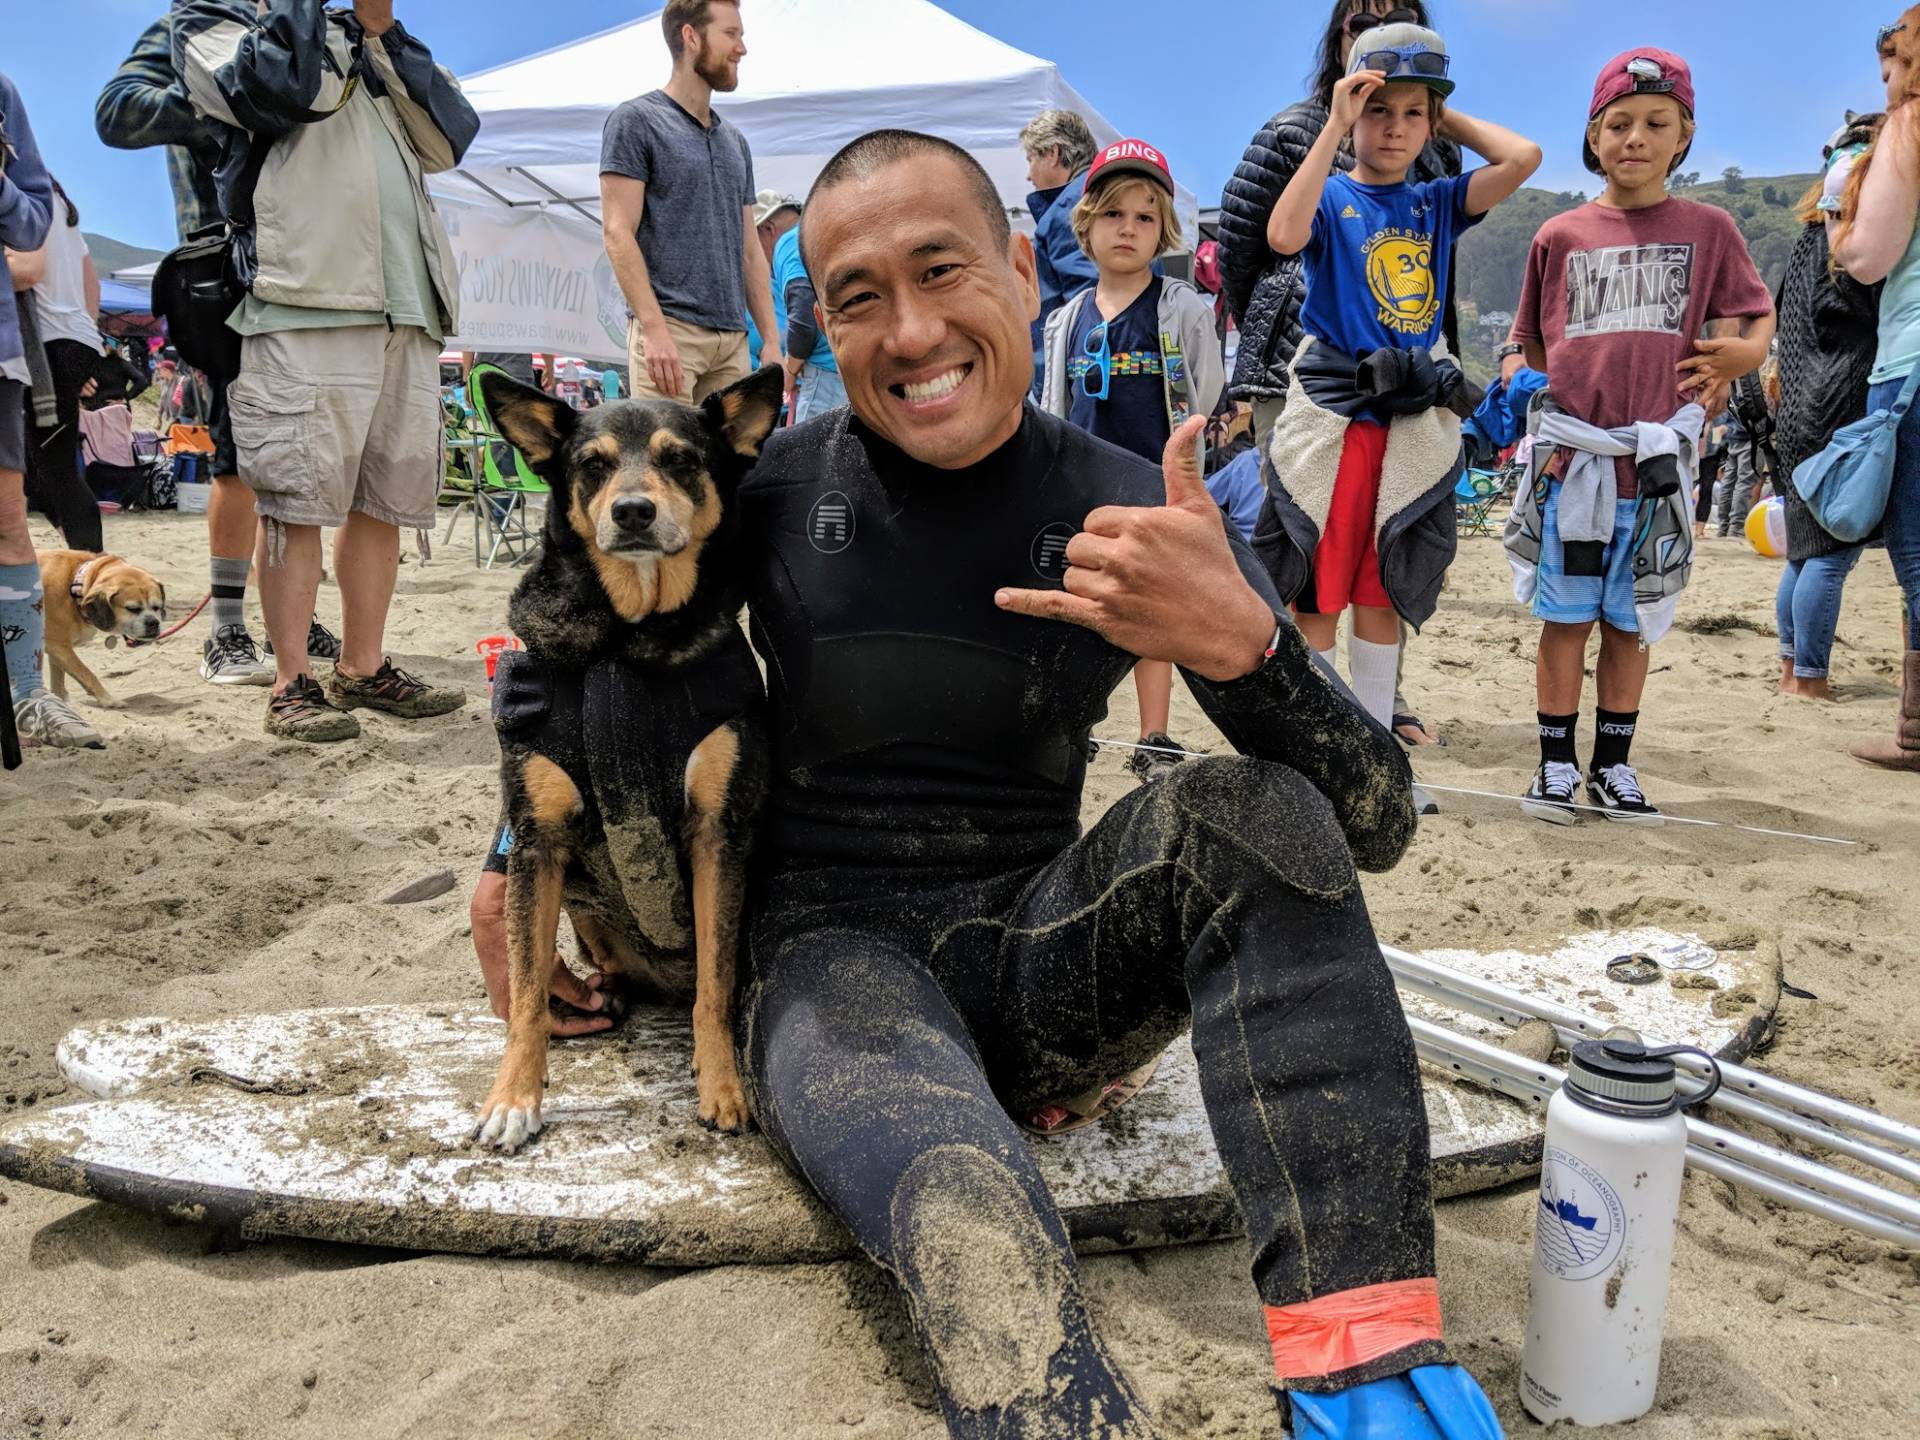 Michael Uy and his dog Abbie Girl are here from Santa Monica. Abbie is the returning champ and also has the Guinness World Record for longest wave surfed by a dog - a total of 107 meters. "You can really tell the bond you have with your dog when you go out surfing together." 